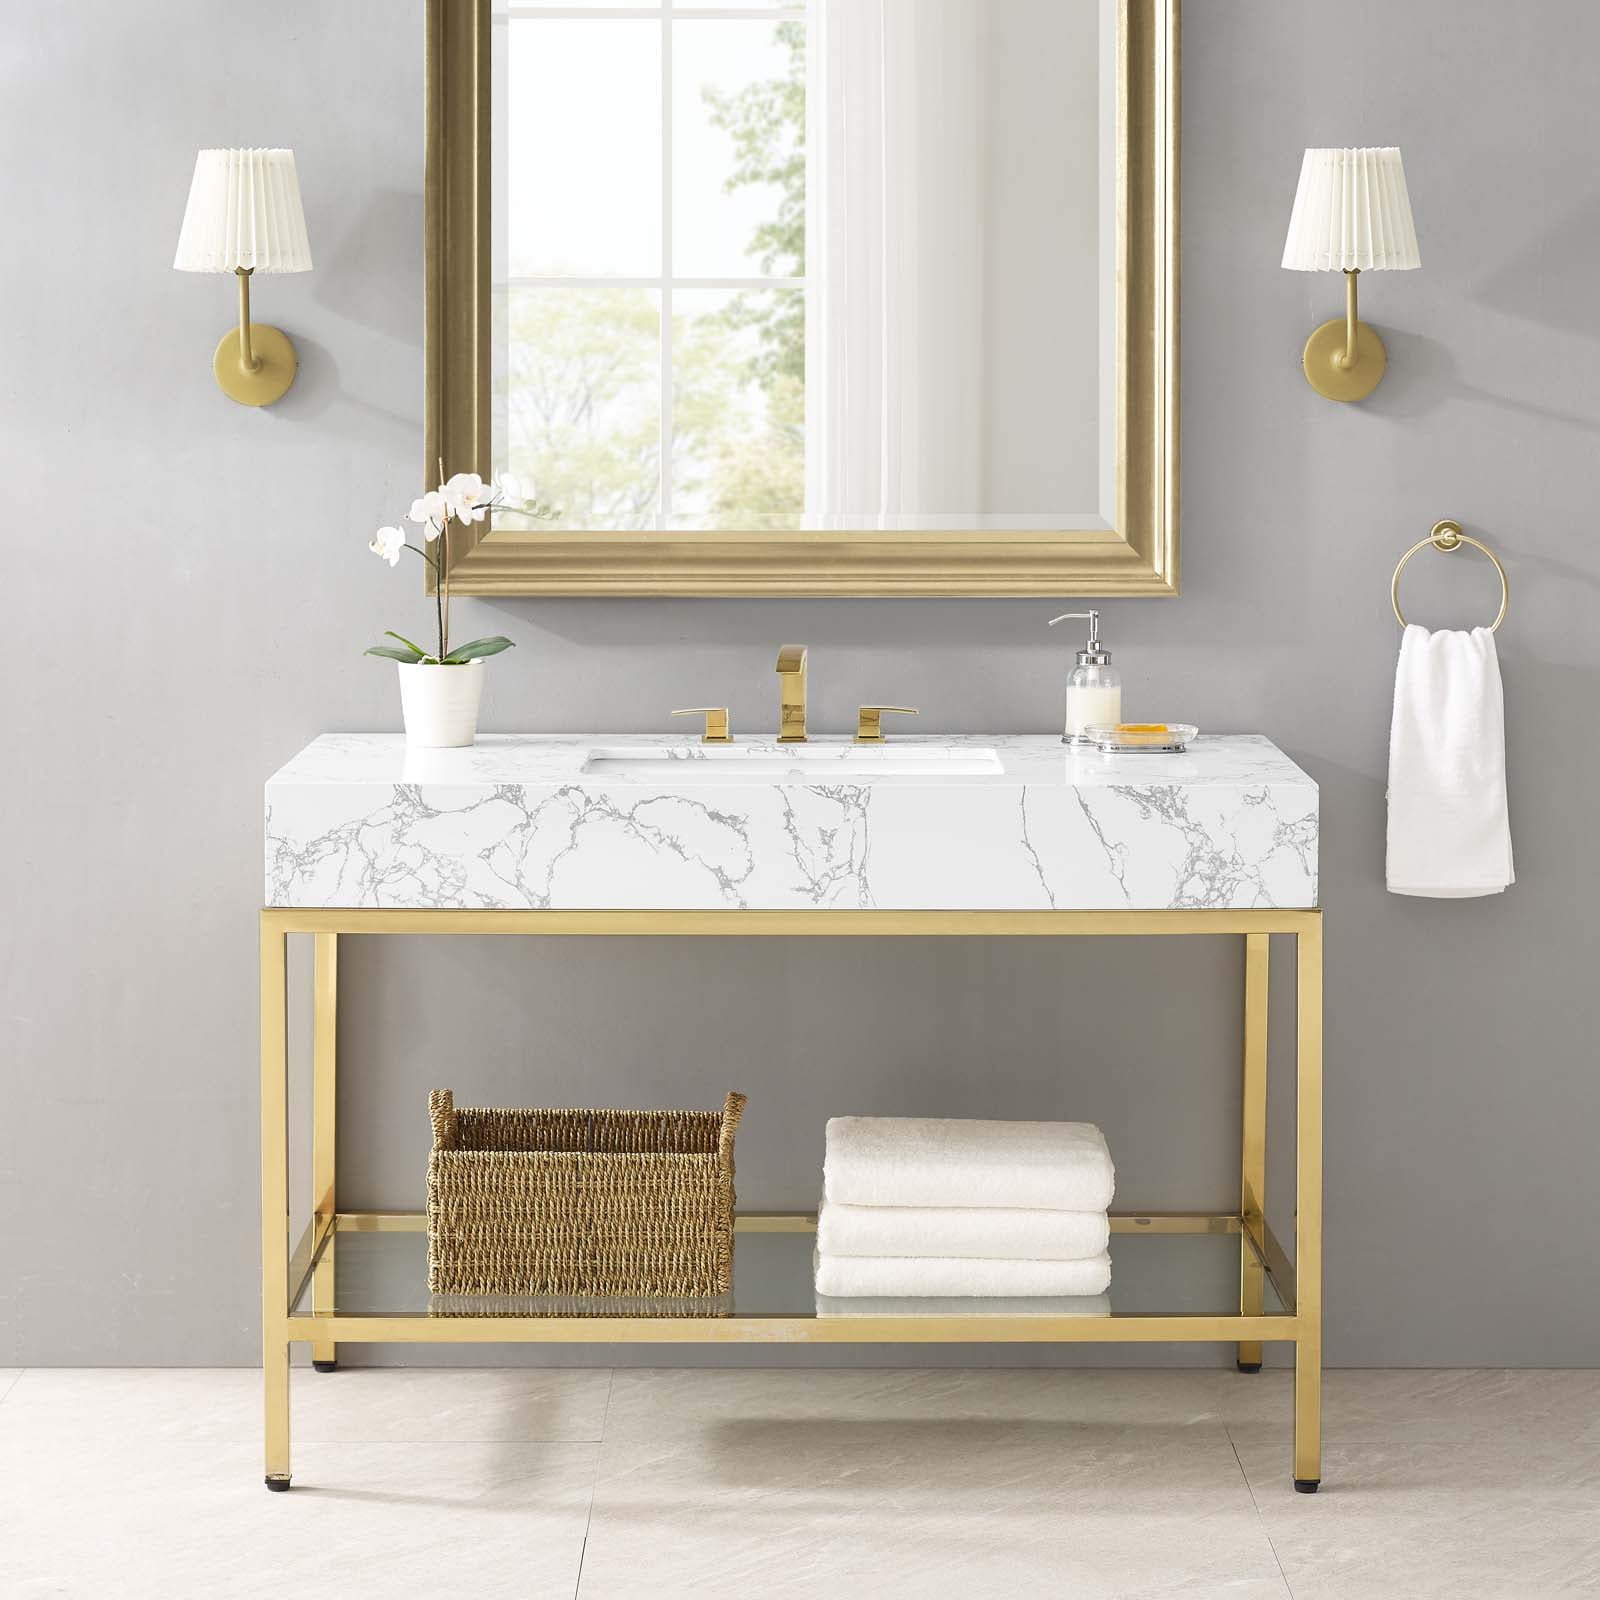 Modway Kingsley 50" Gold Stainless Steel Bathroom Vanity in Gold White